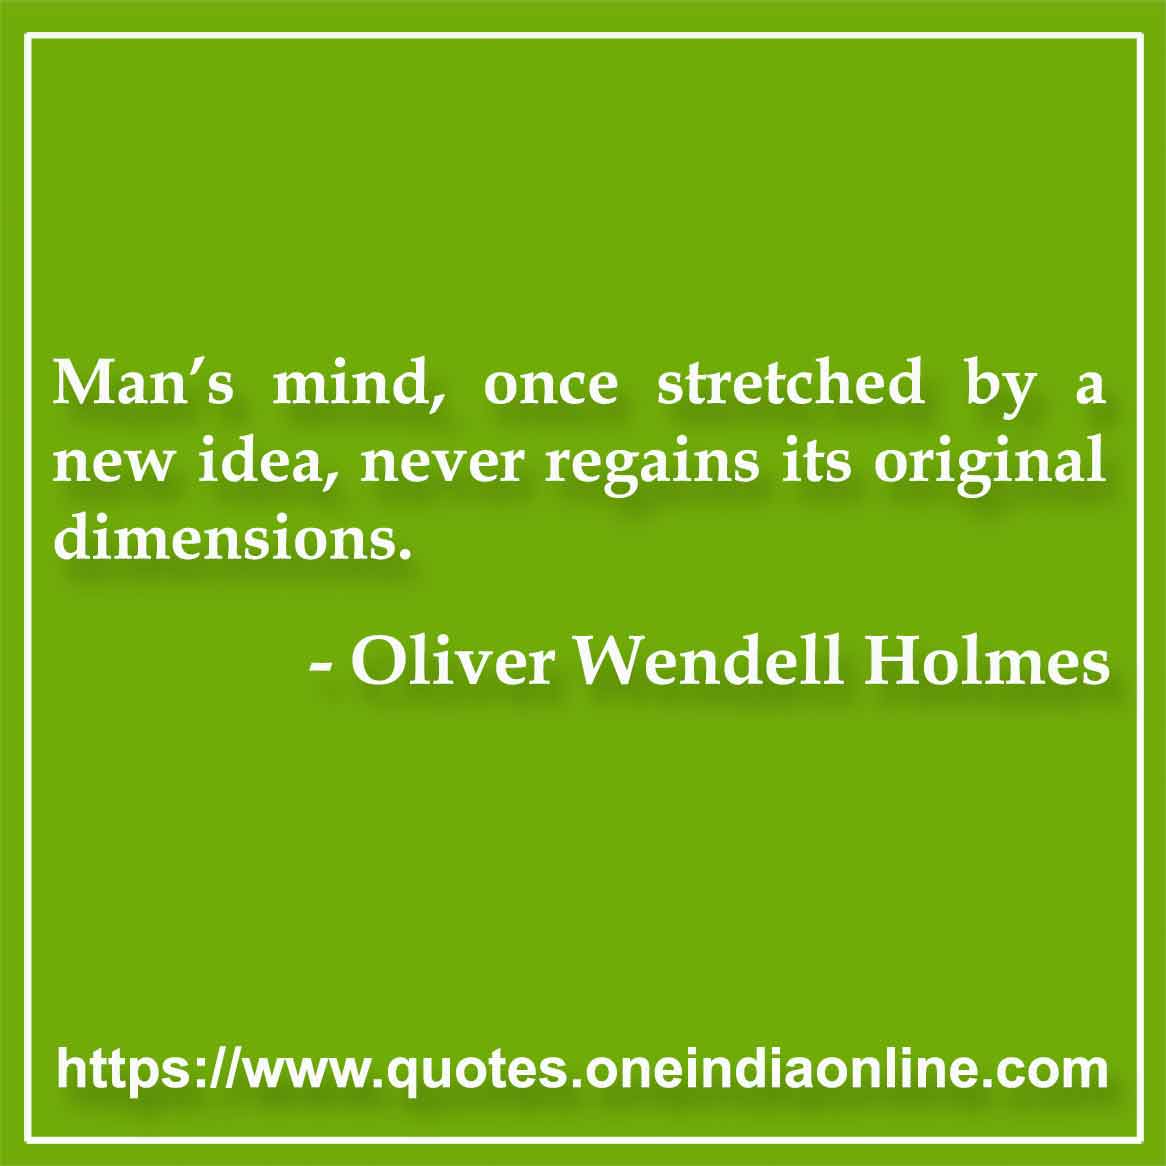 Man’s mind, once stretched by a new idea, never regains its original dimensions.

- Learning Thoughts by Oliver Wendell Holmes 